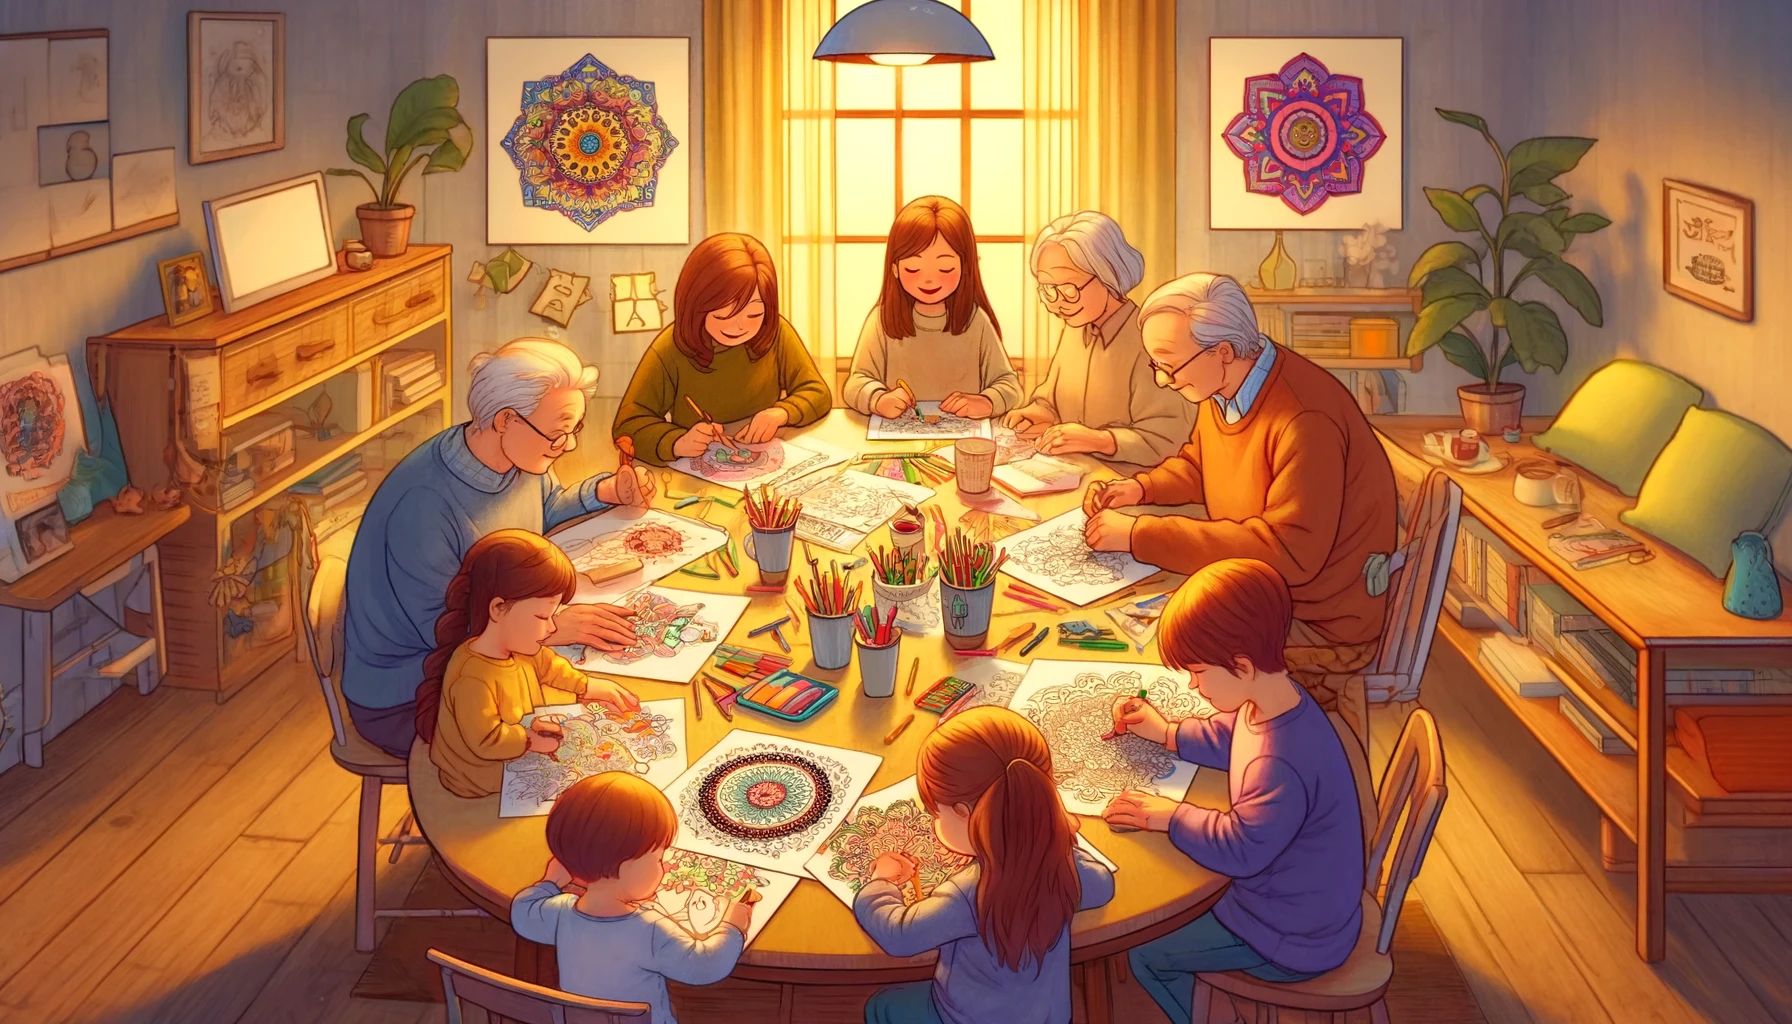 The Family That Colors Together: Social Coloring Activities for Everyone